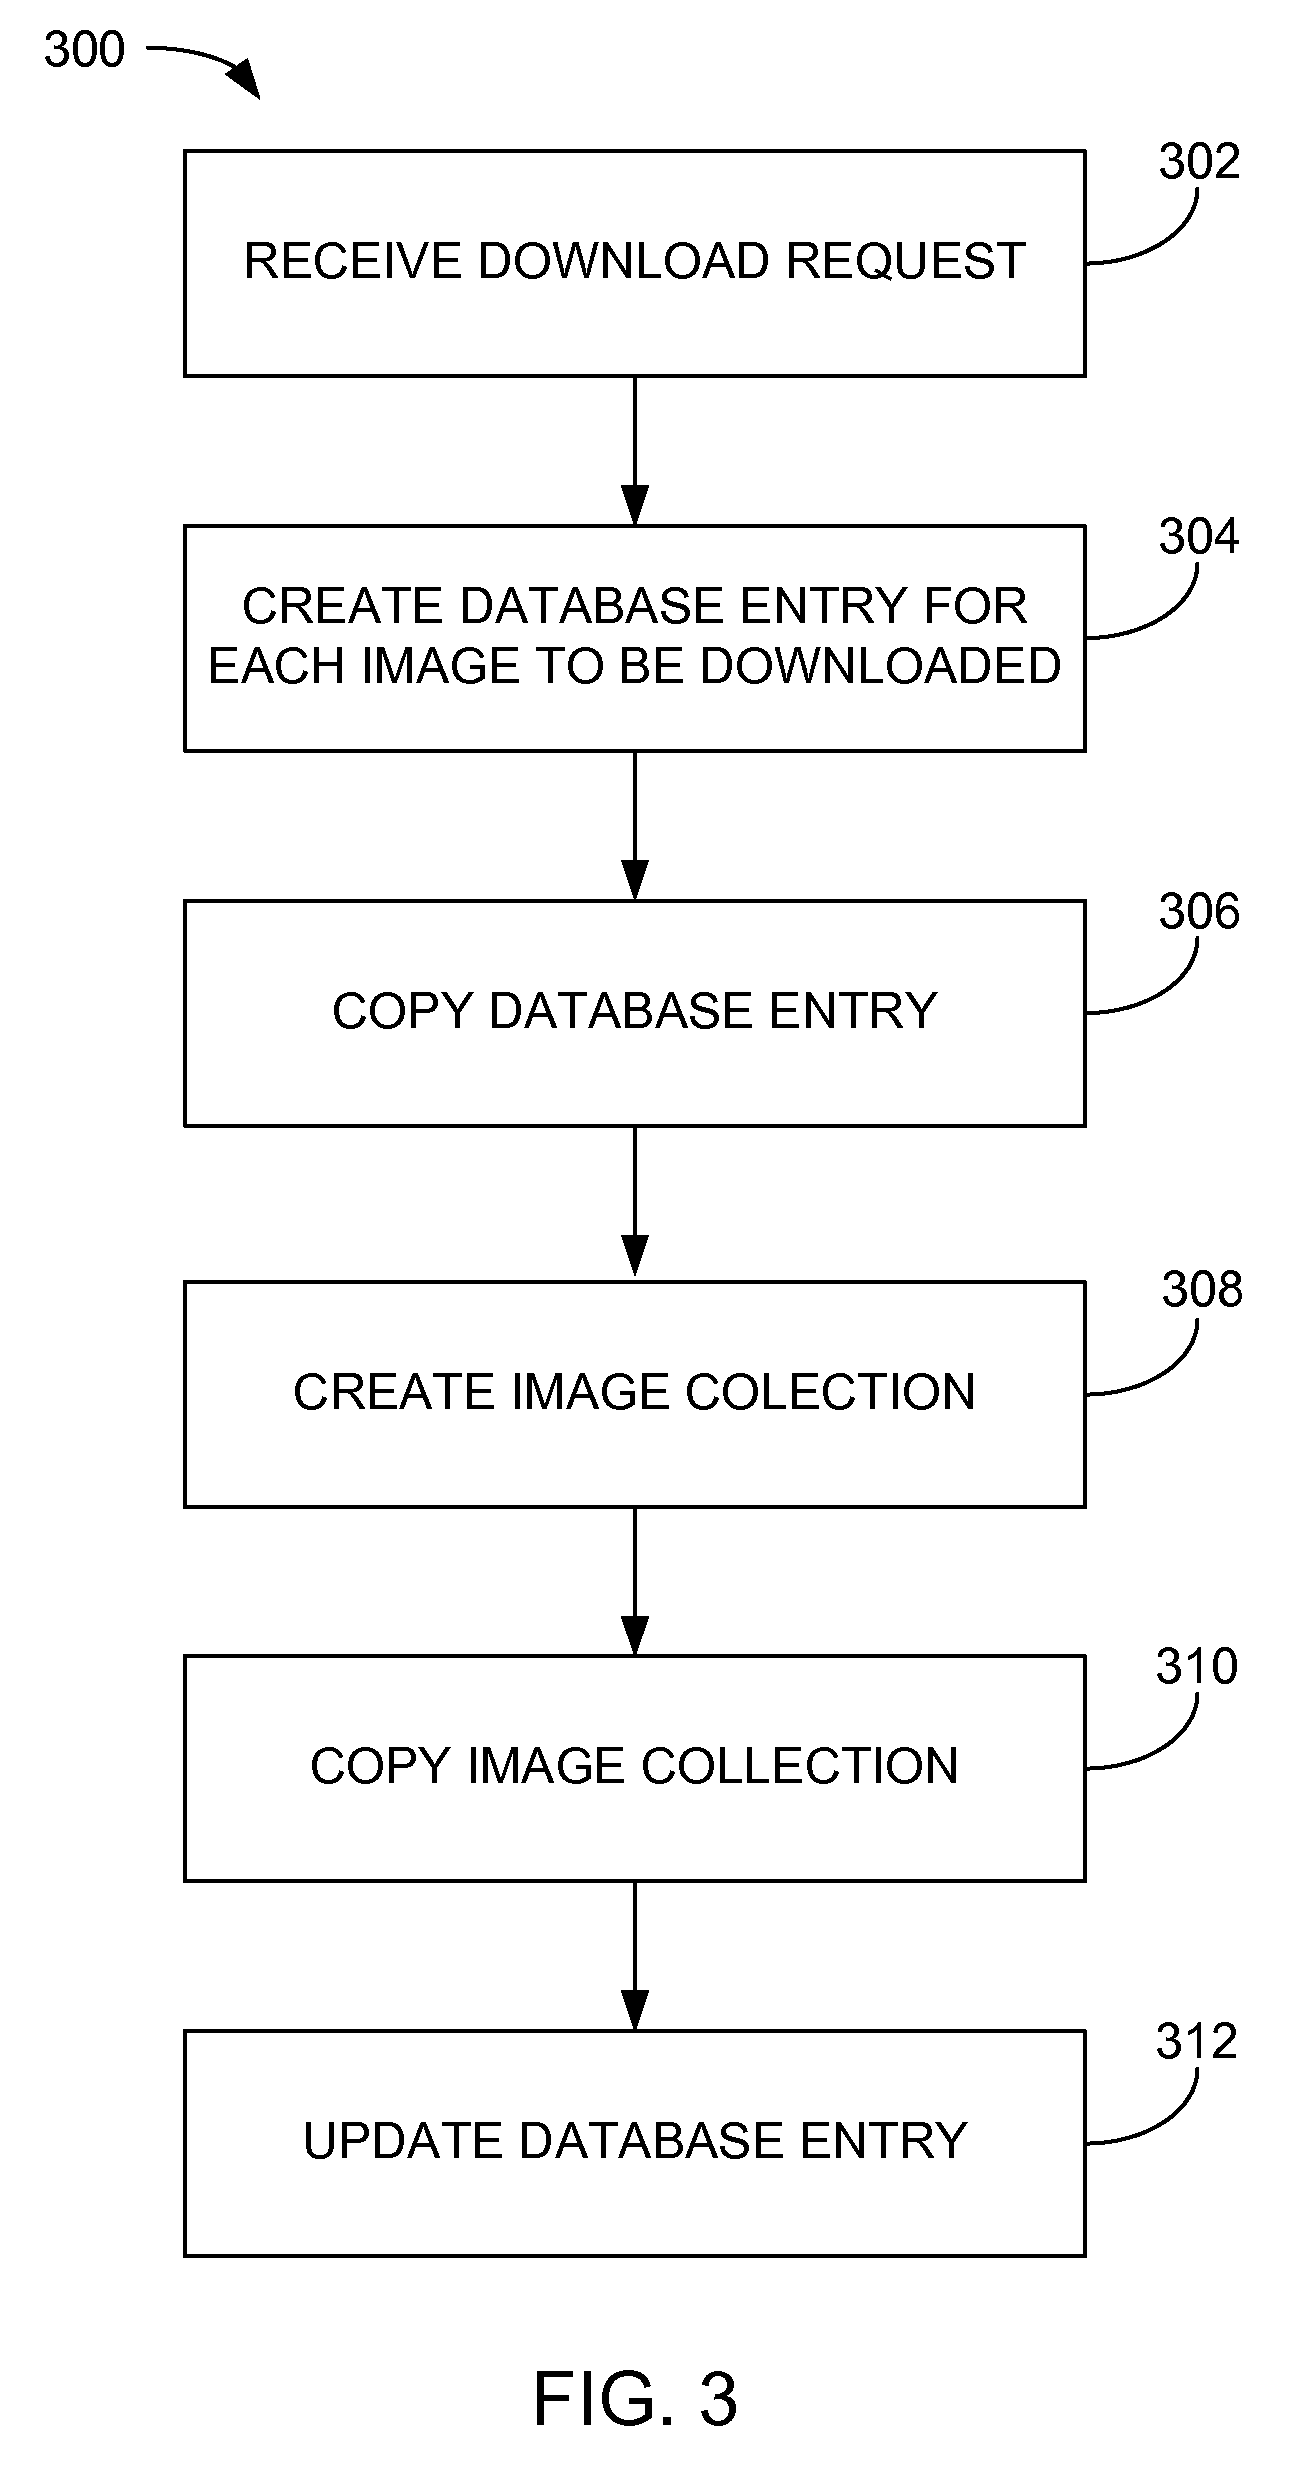 Host configured for interoperation with coupled portable media player device